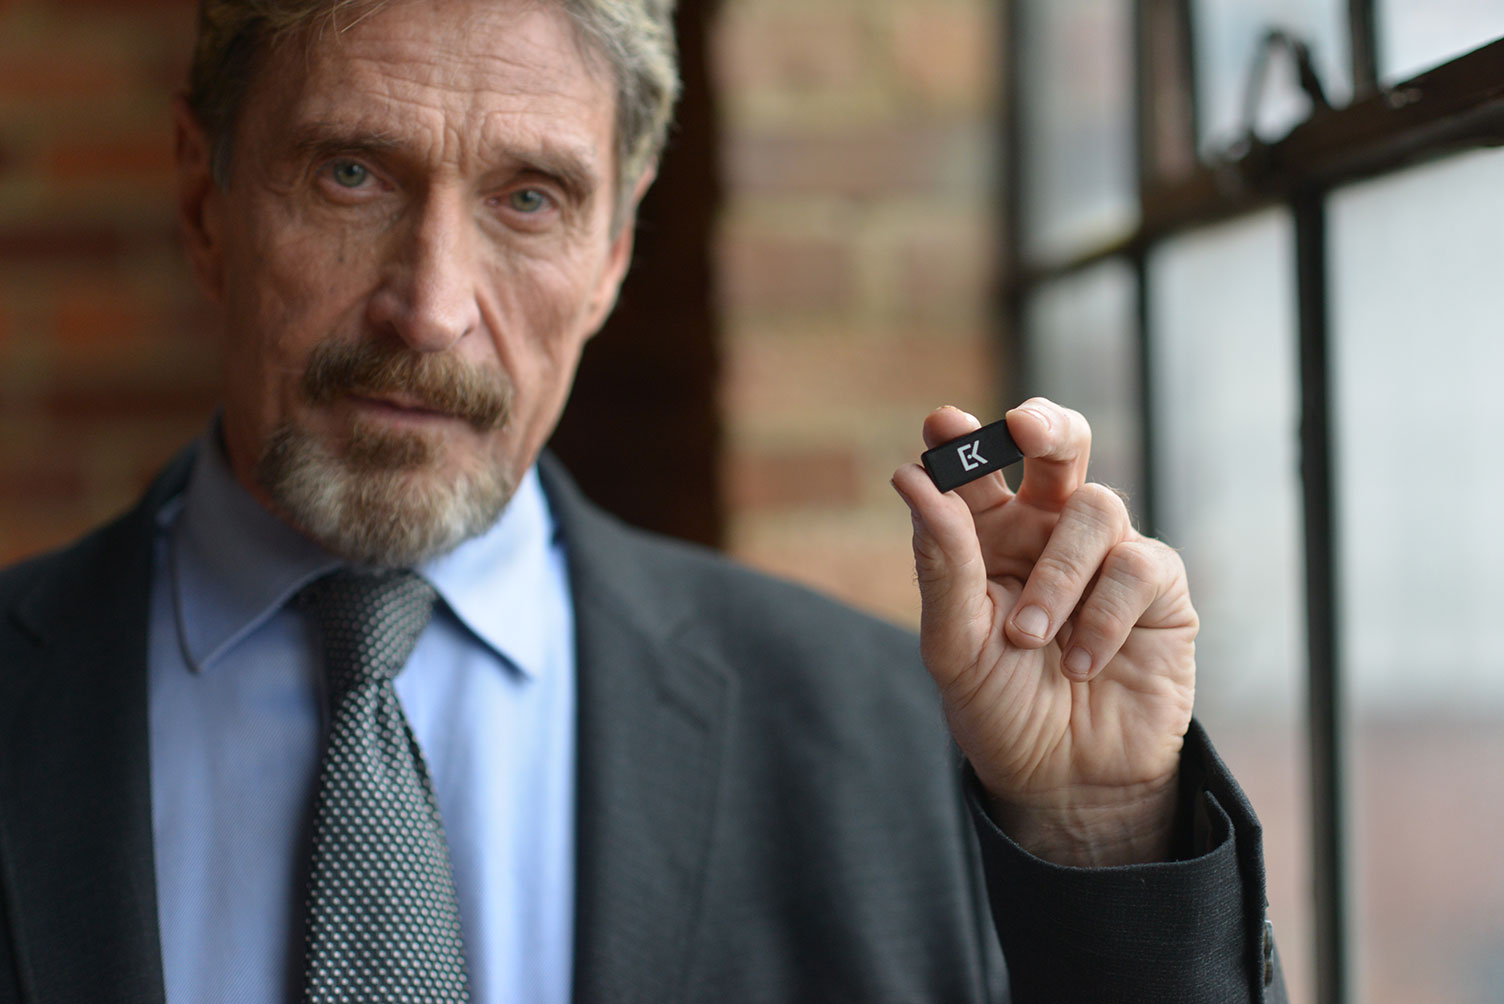 John McAfee on his new startup and why he should be president